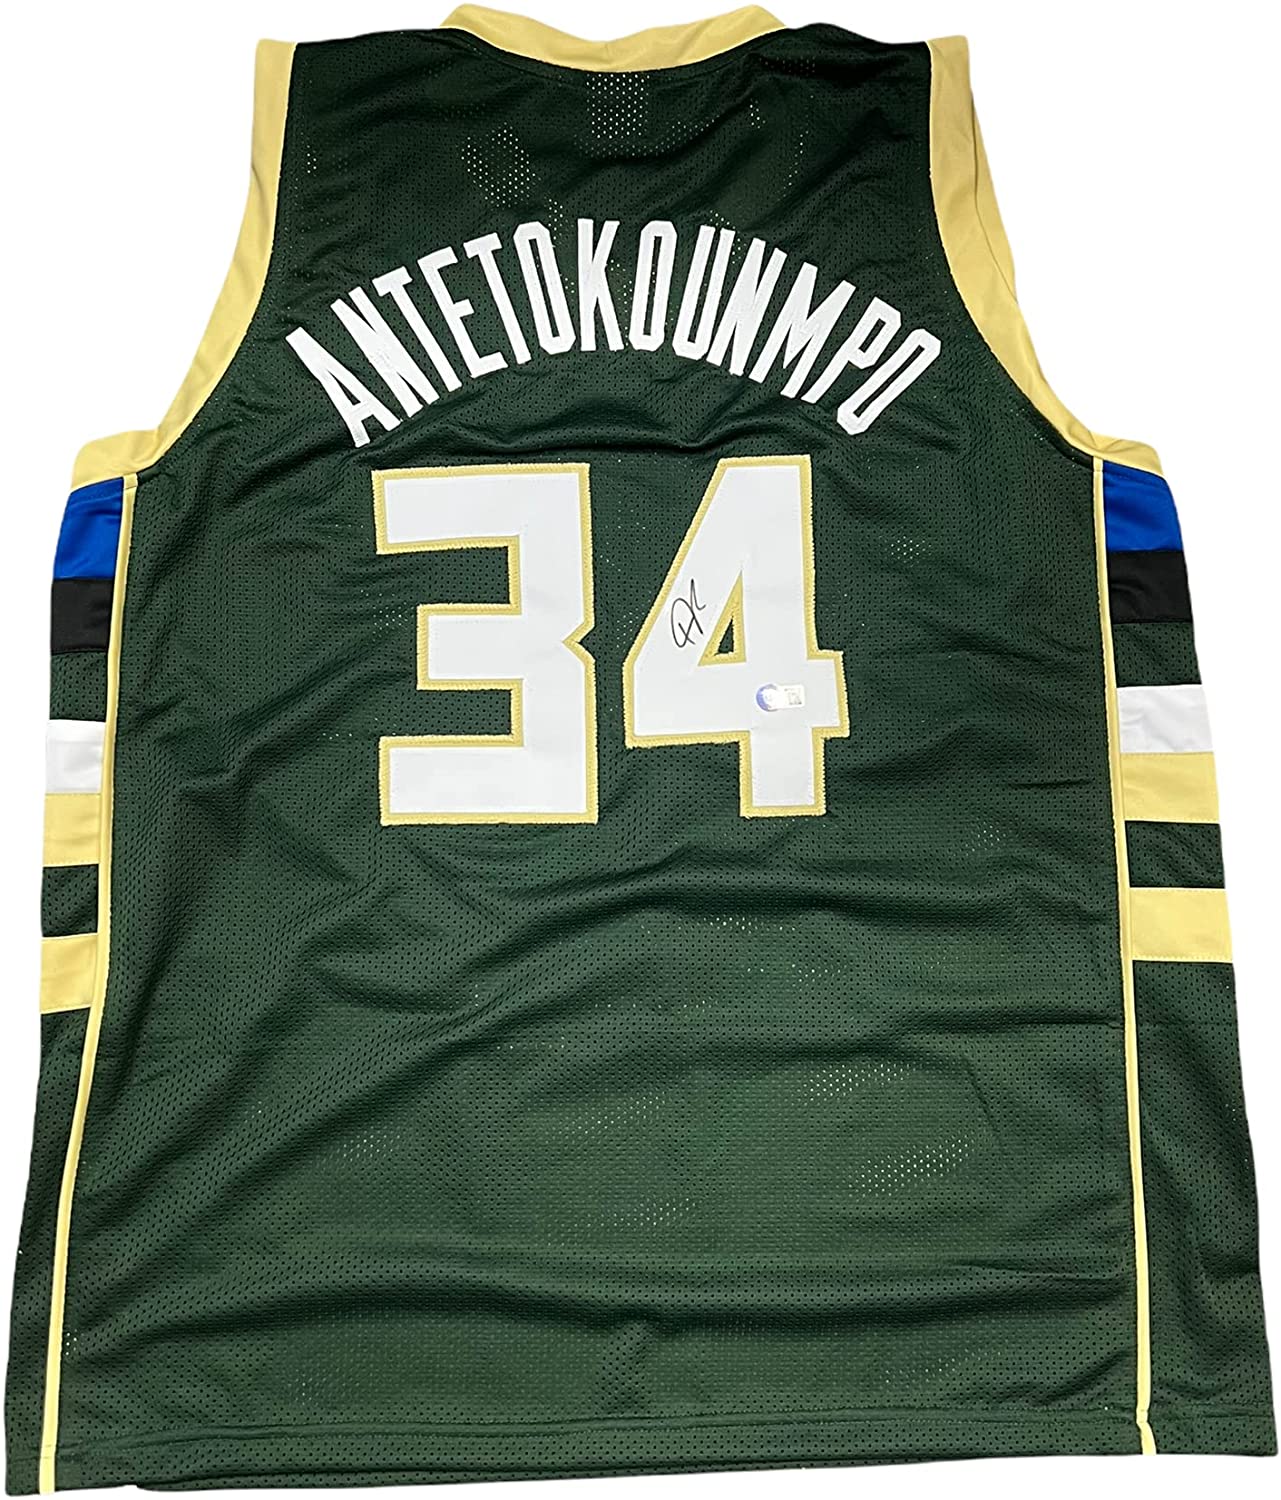 Giannis Antetokounmpo Autographed Framed Green Milwaukee Jersey